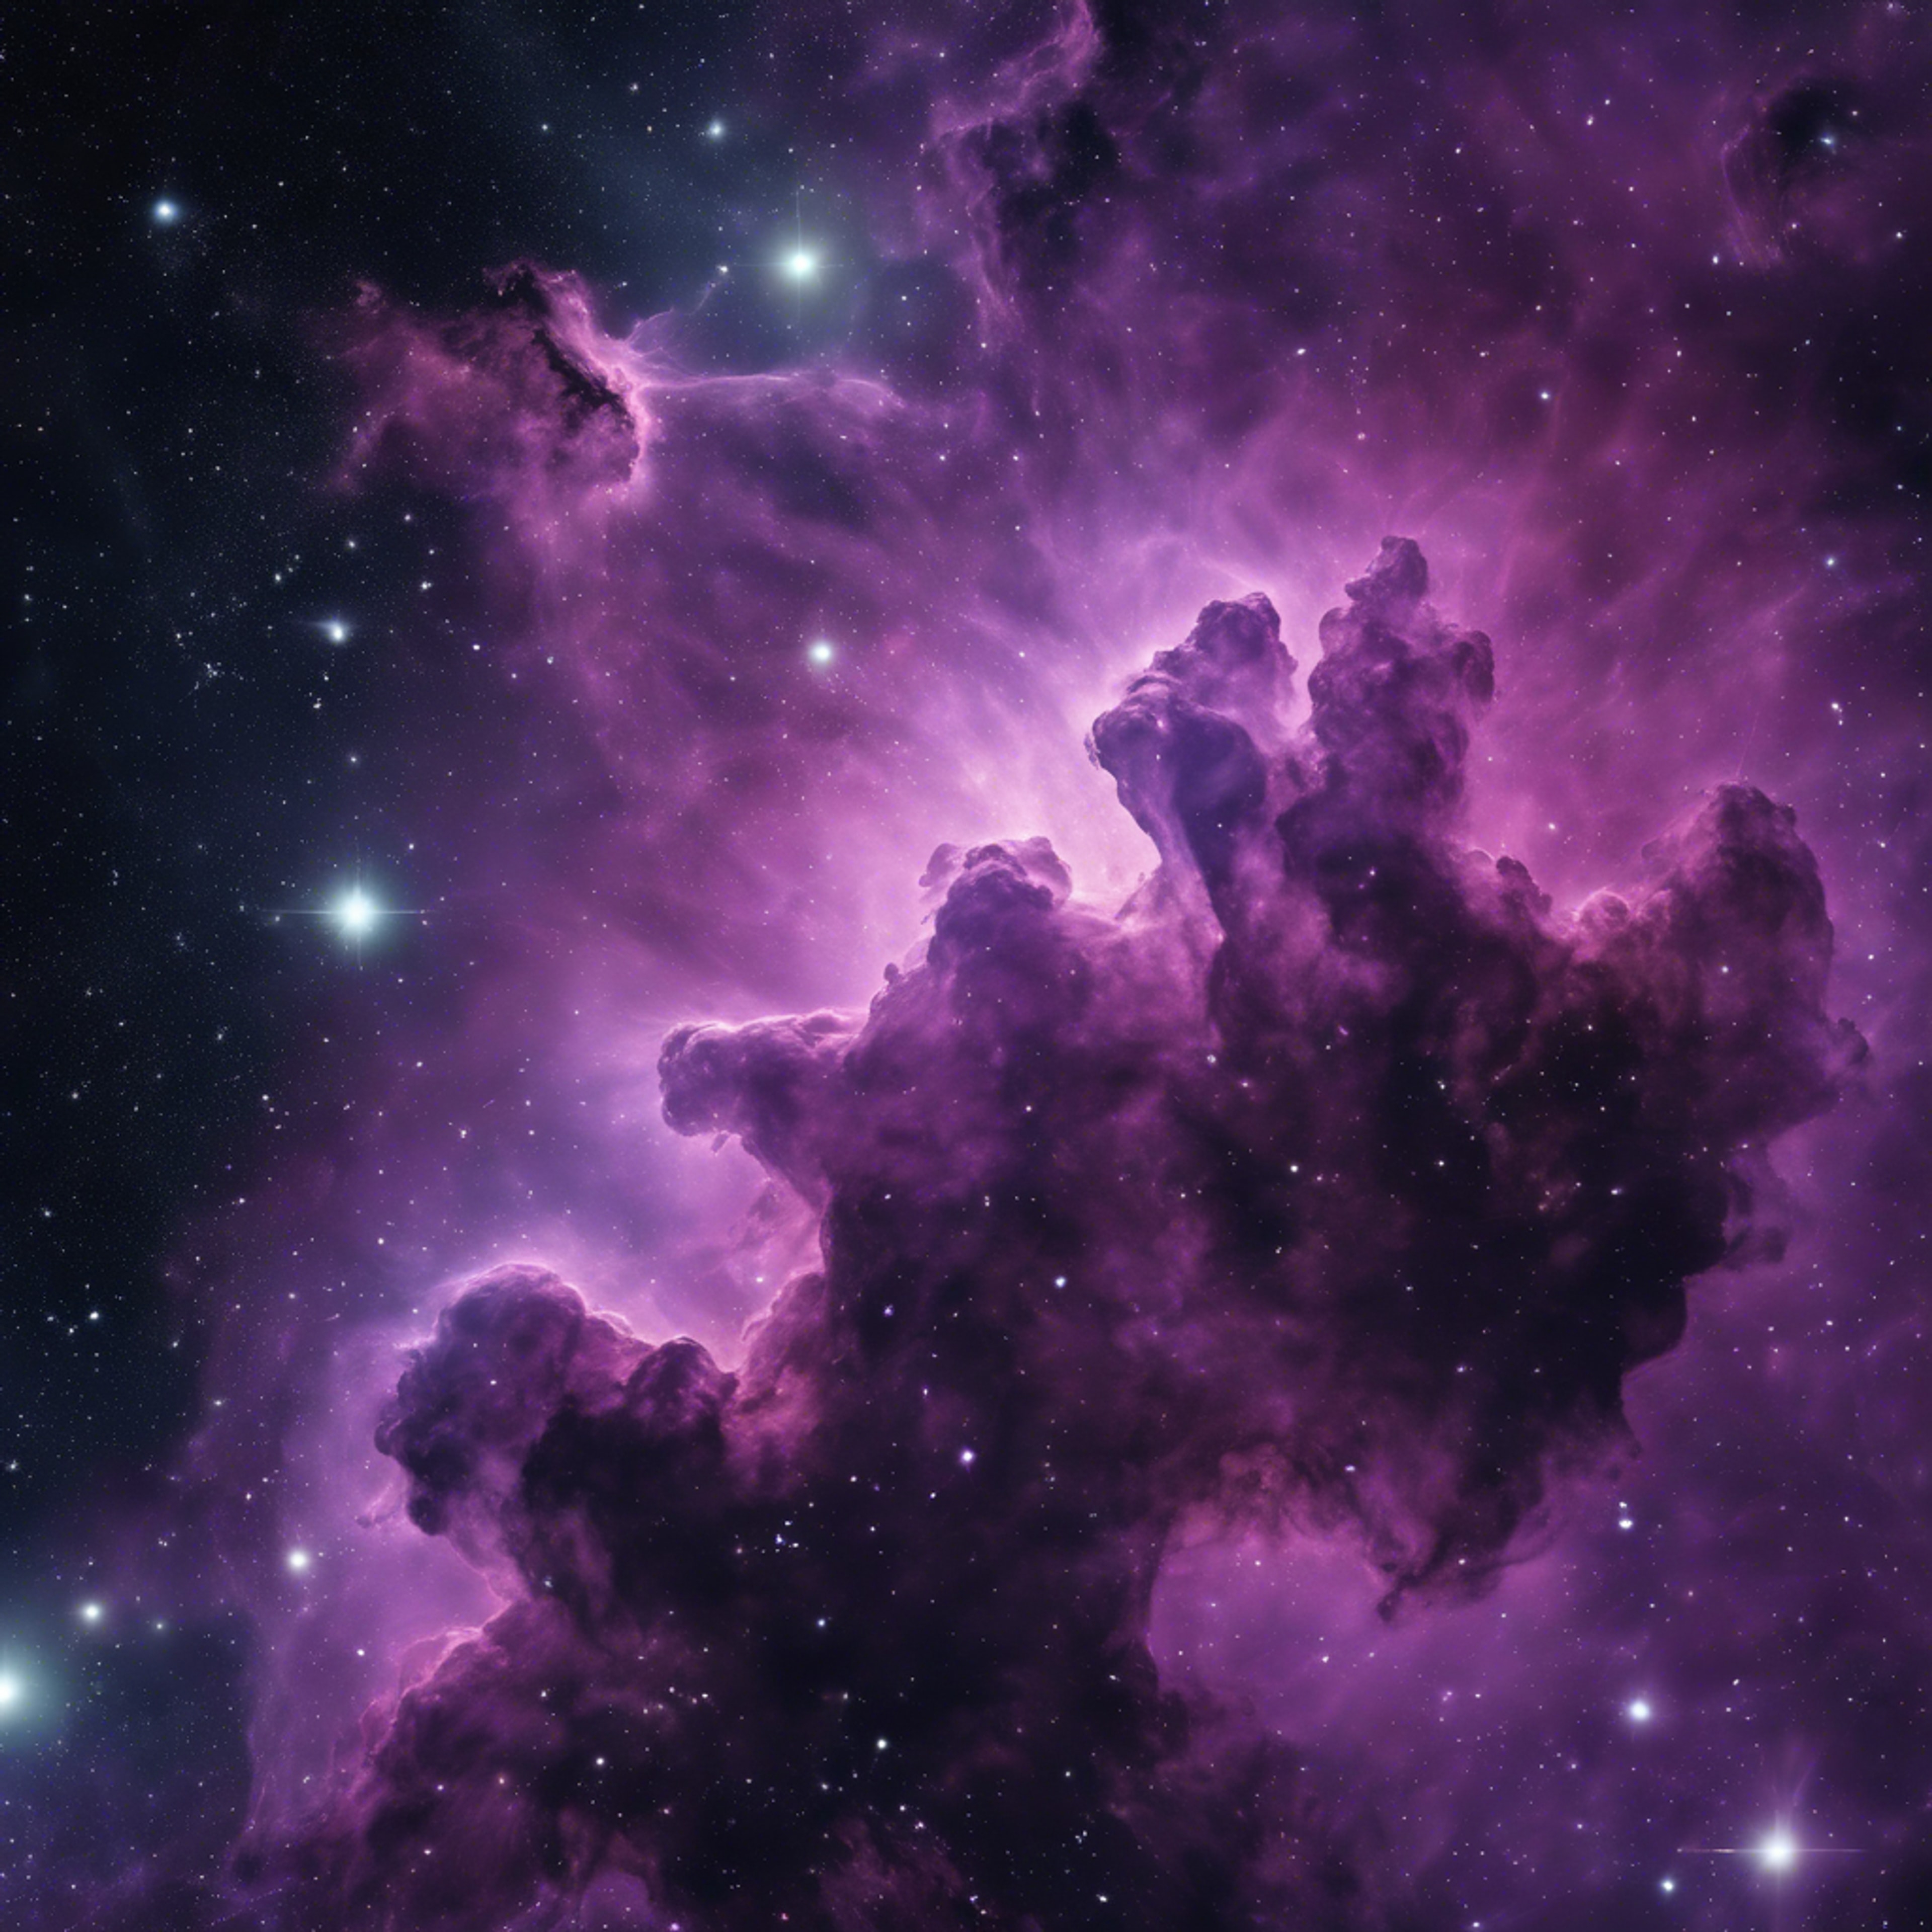 A nebula in space with black voids, and purple, star-lit clouds of gas and dust.壁紙[3e7a619716144d8ba851]